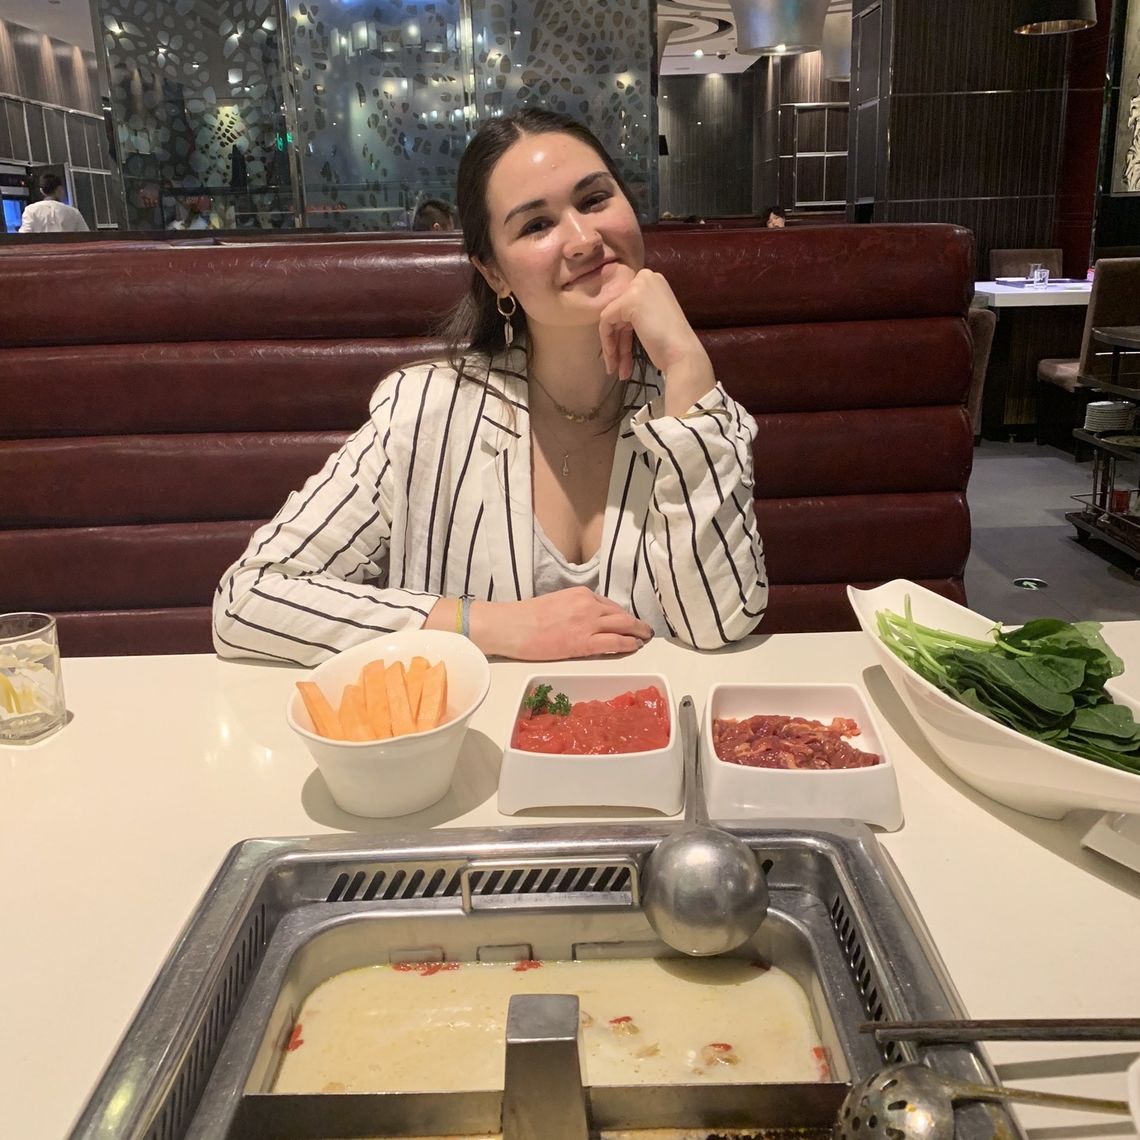 Chappell enjoys a hot pot meal in Wuhan. The traditional Chinese dish consists of sliced meats and vegetables simmered in broth.